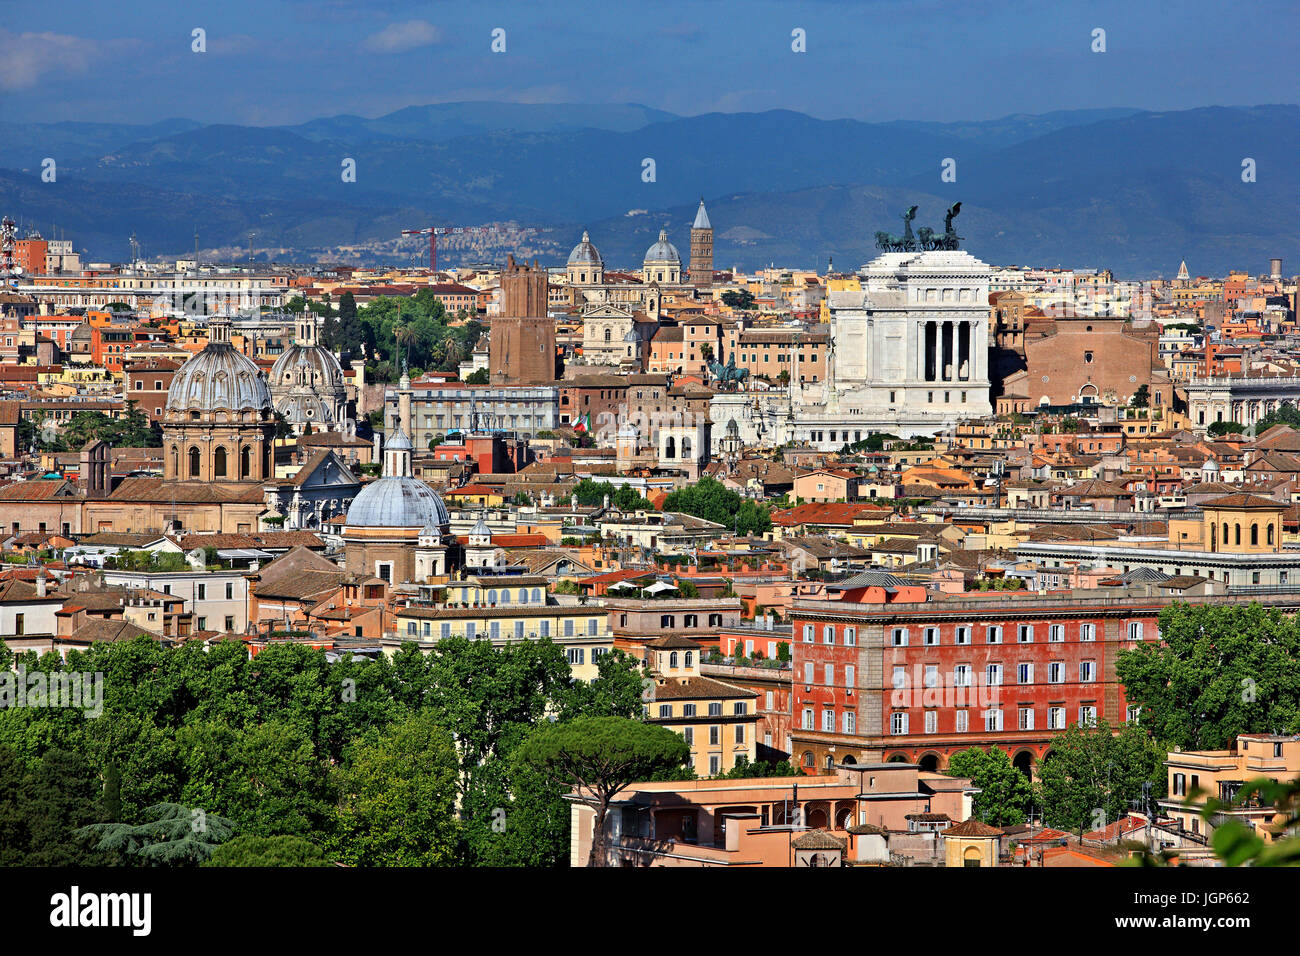 View of Rome from Gianicolo hill. The white building that stands out is the 'Vittoriano', also known as 'Altare della Patria'. Stock Photo